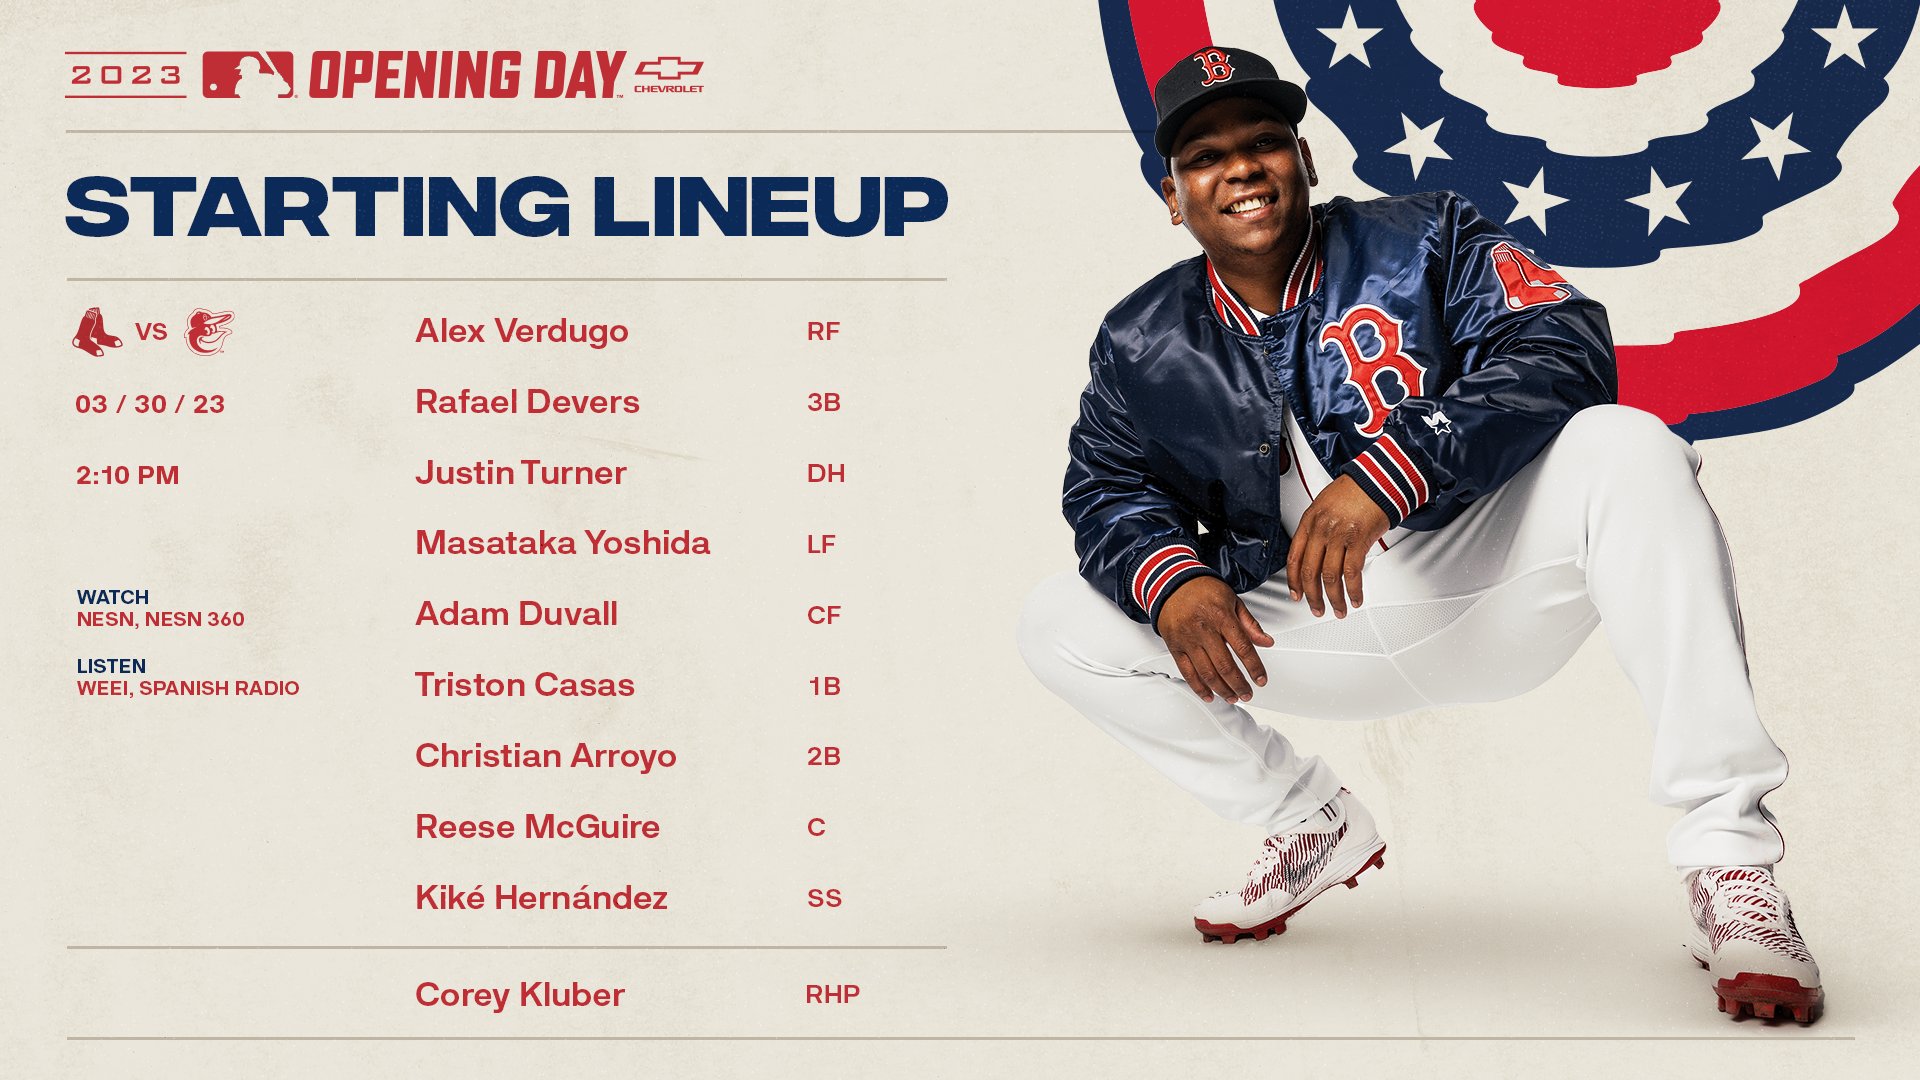 Red Sox on X: We've got baseball to play today! #OpeningDay https